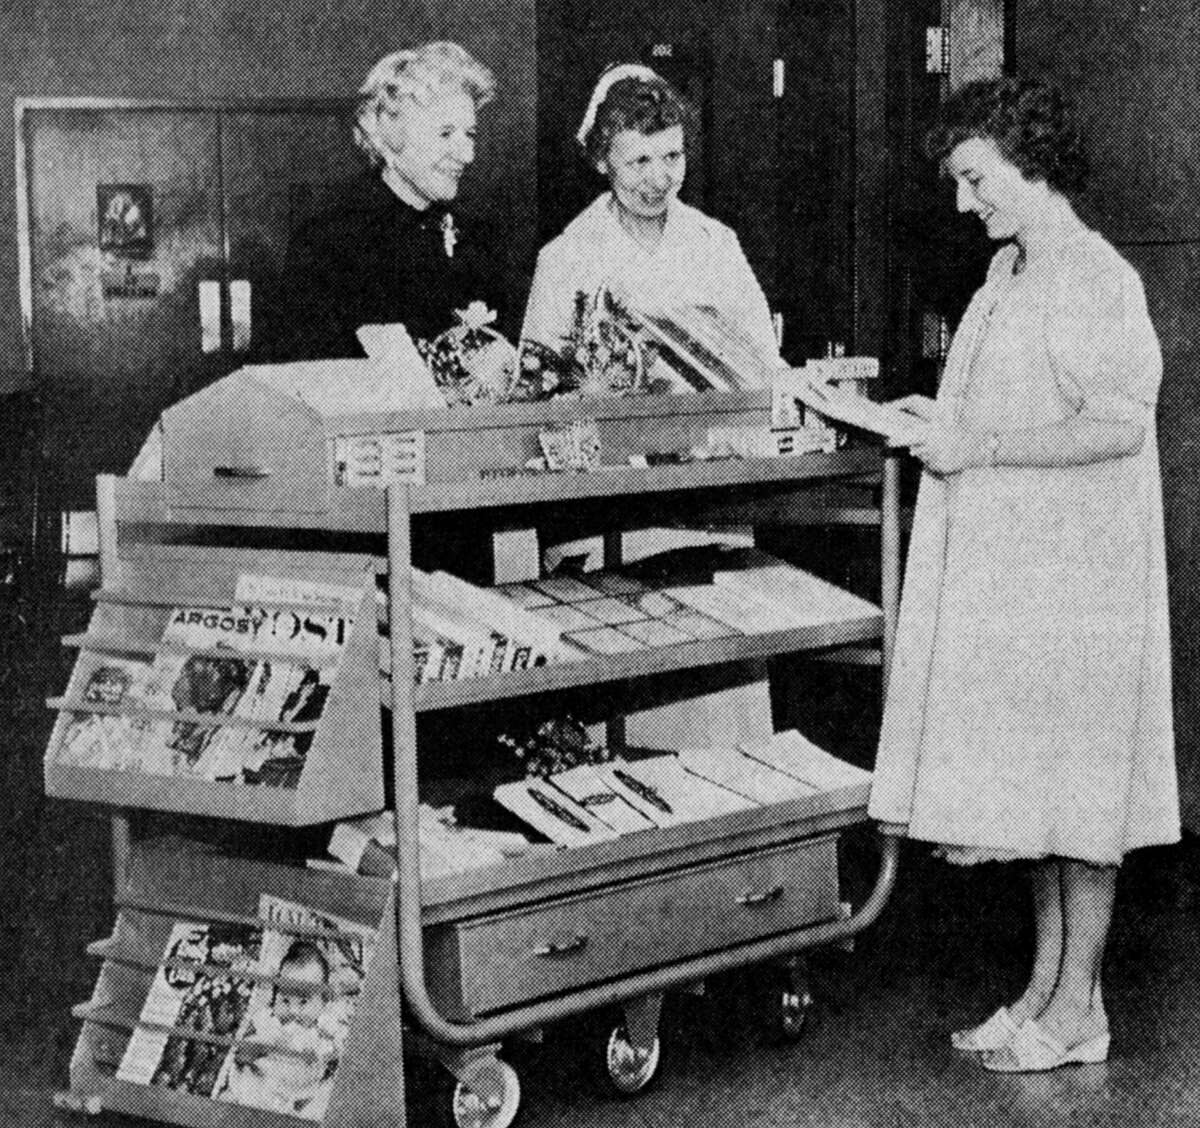 The Women's Auxiliary of Mercy-Community Hospital announces that the gift cart will soon be a familiar sight in the hospital corridors during visiting hours each day. Shown are Mrs. Alfred Kuechenmeister, Mrs. Ruth Shaw, registered nurse and Mrs. William Pearce, patient. The photo was published in the News Advocate on March 21, 1962.